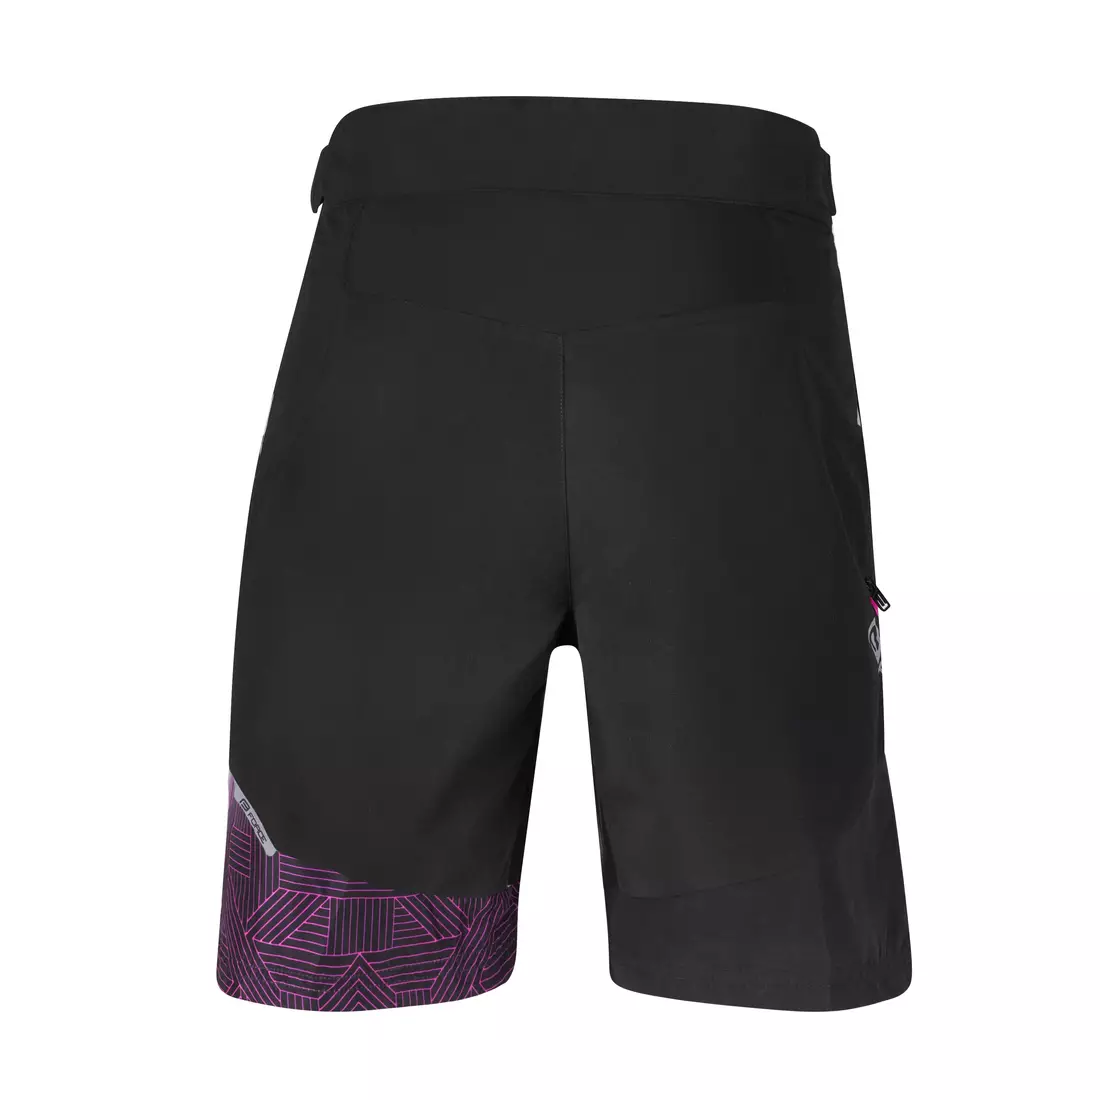 FORCE STORM Women's MTB cycling shorts 2in1 black-pink 900241